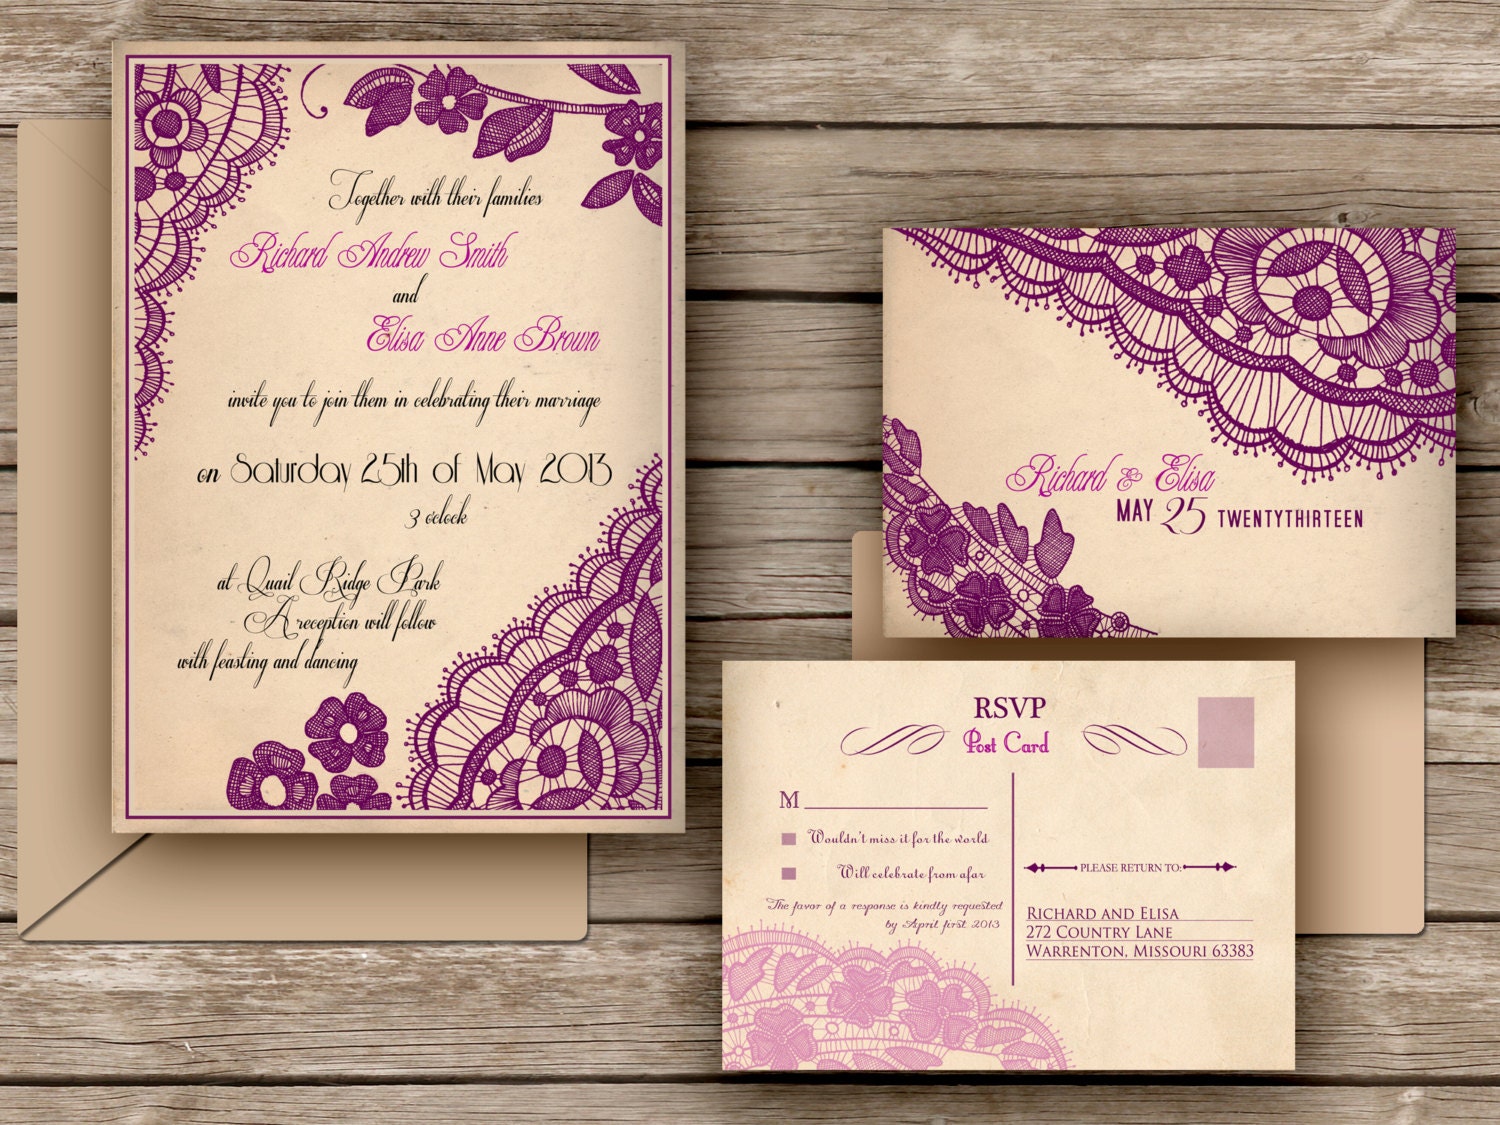 WEDDING INVITATIONS PRINTABLE Lace by DesignedWithAmore on Etsy